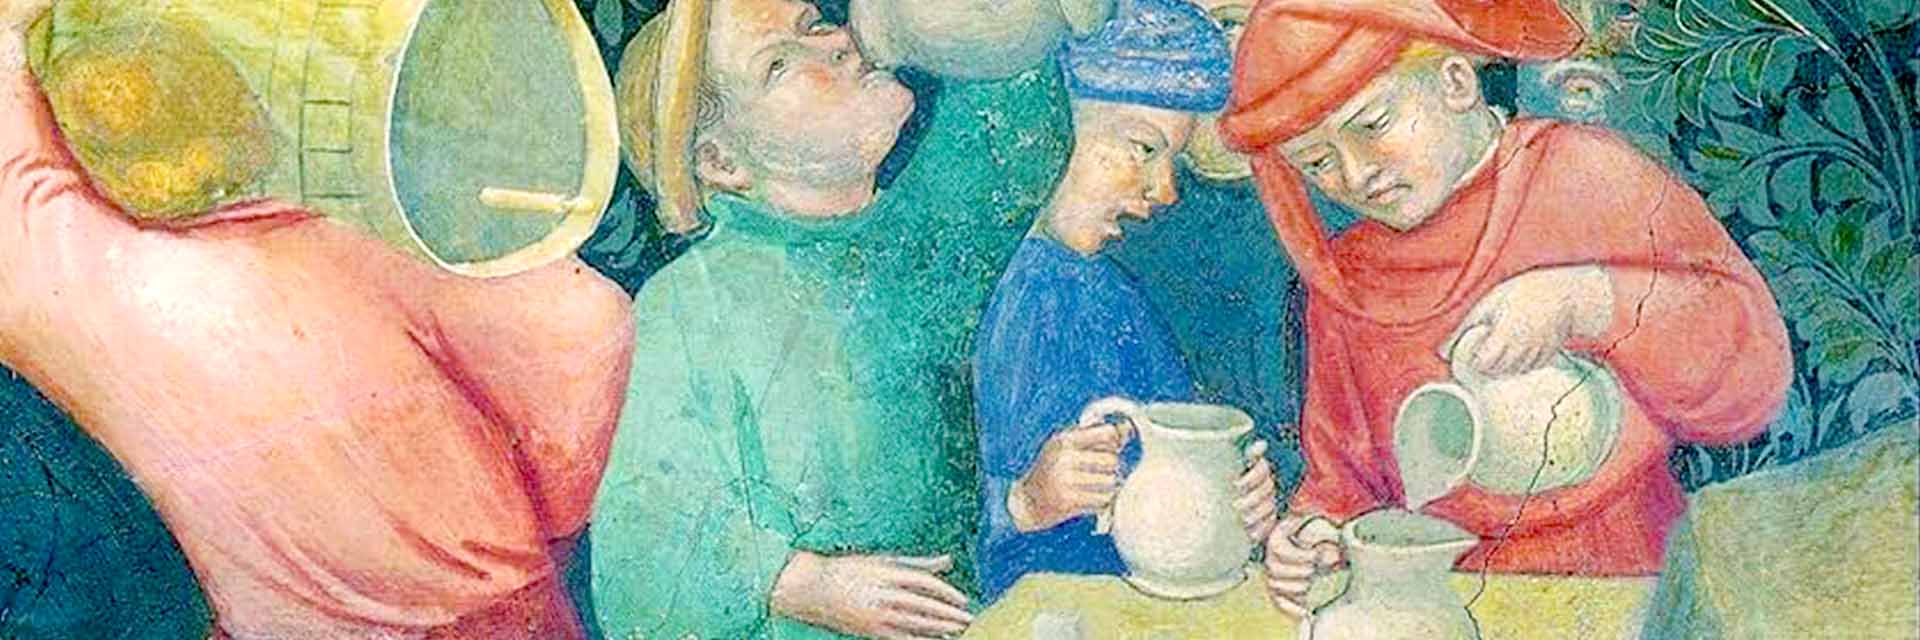 Drinking Plain Water in the Early Modern Period